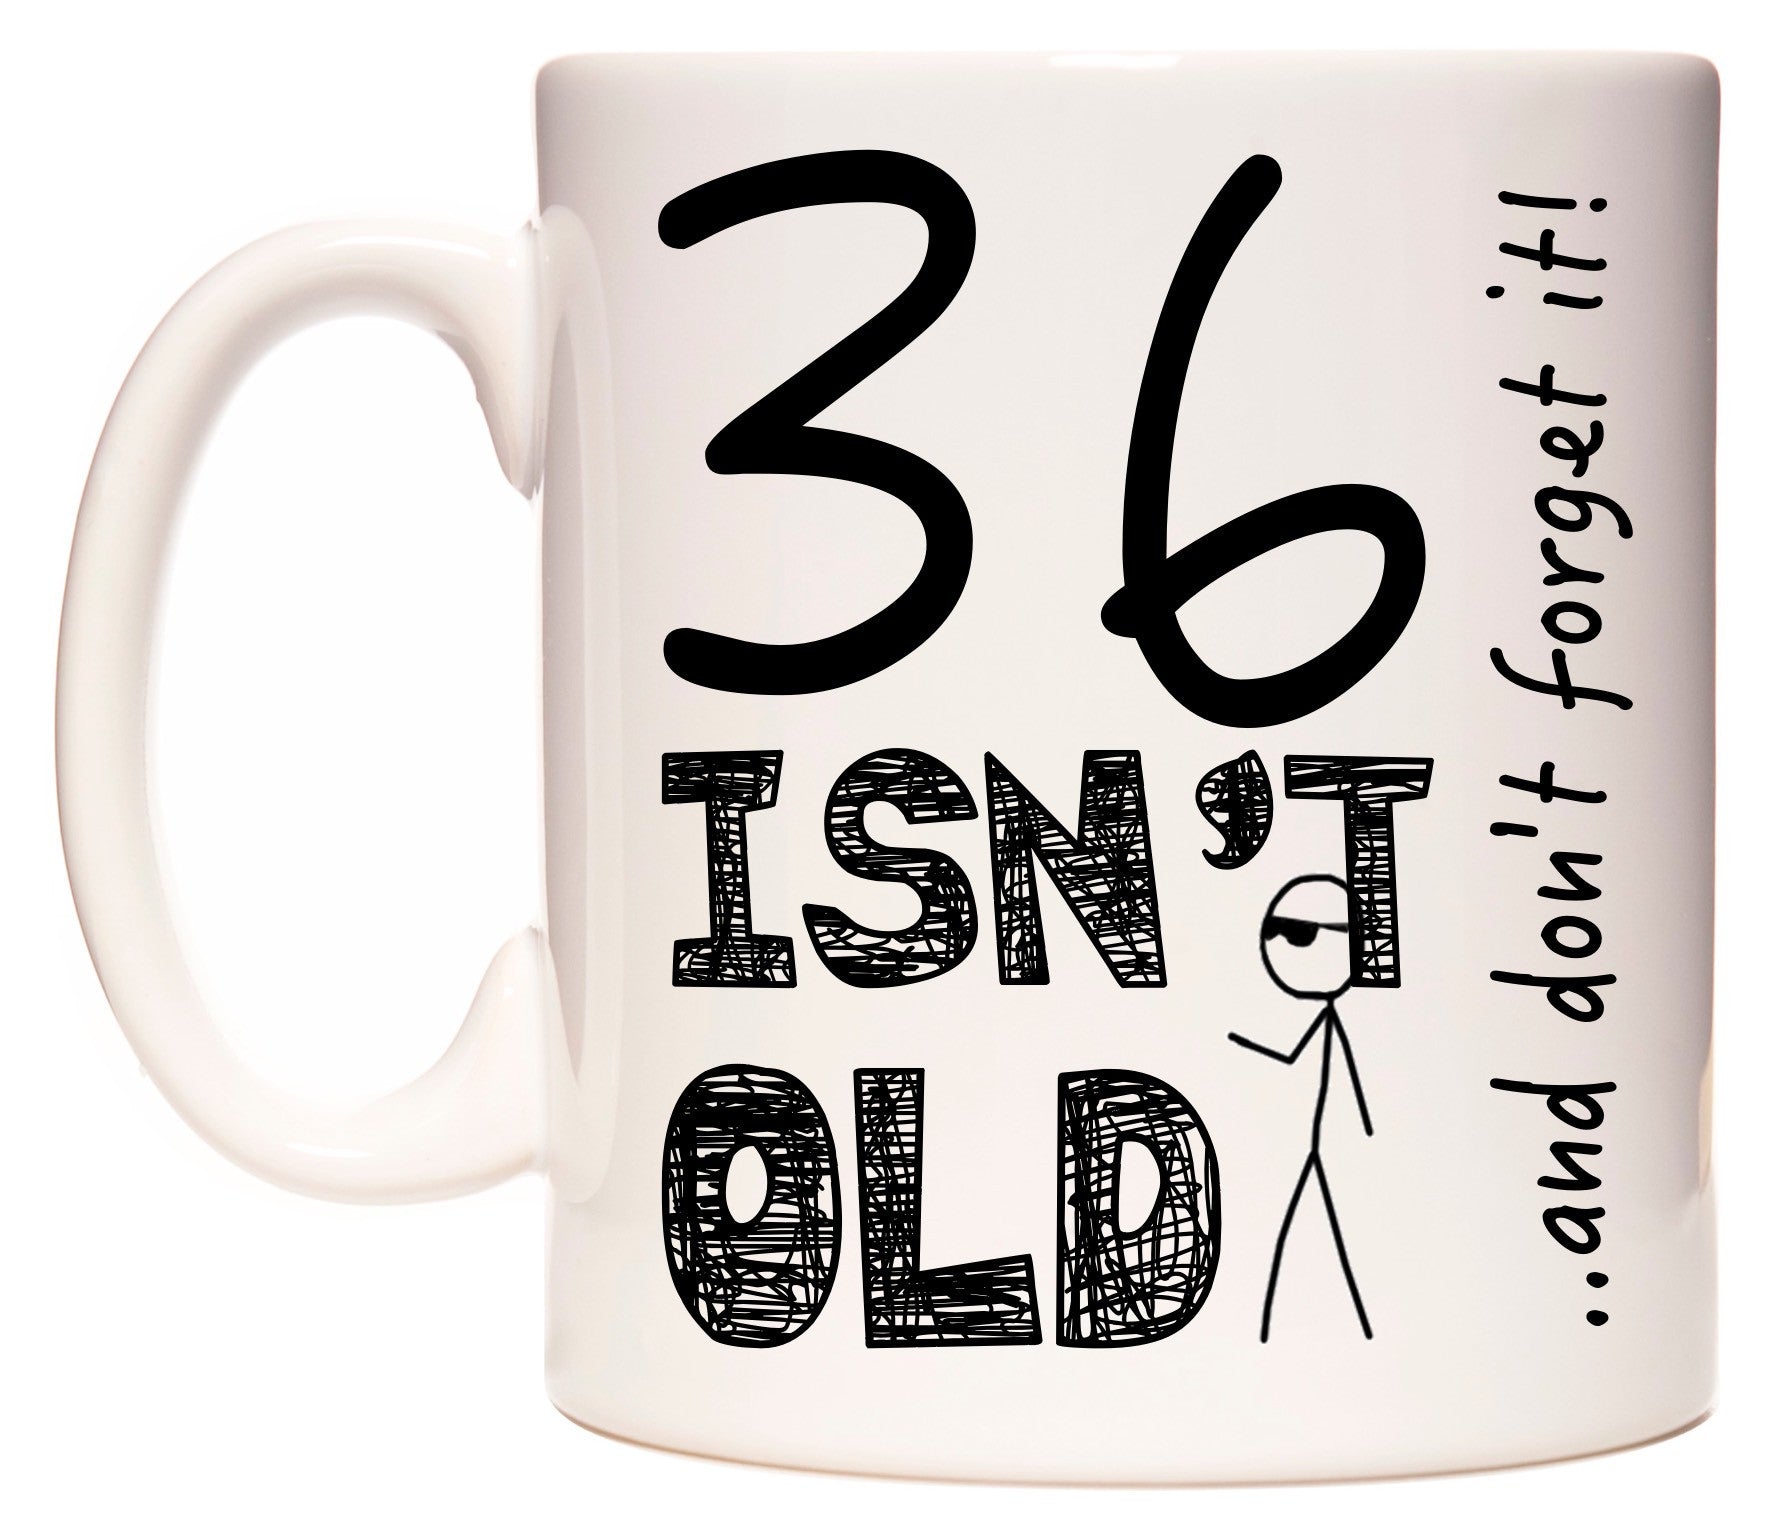 This mug features 36 Isn't Old